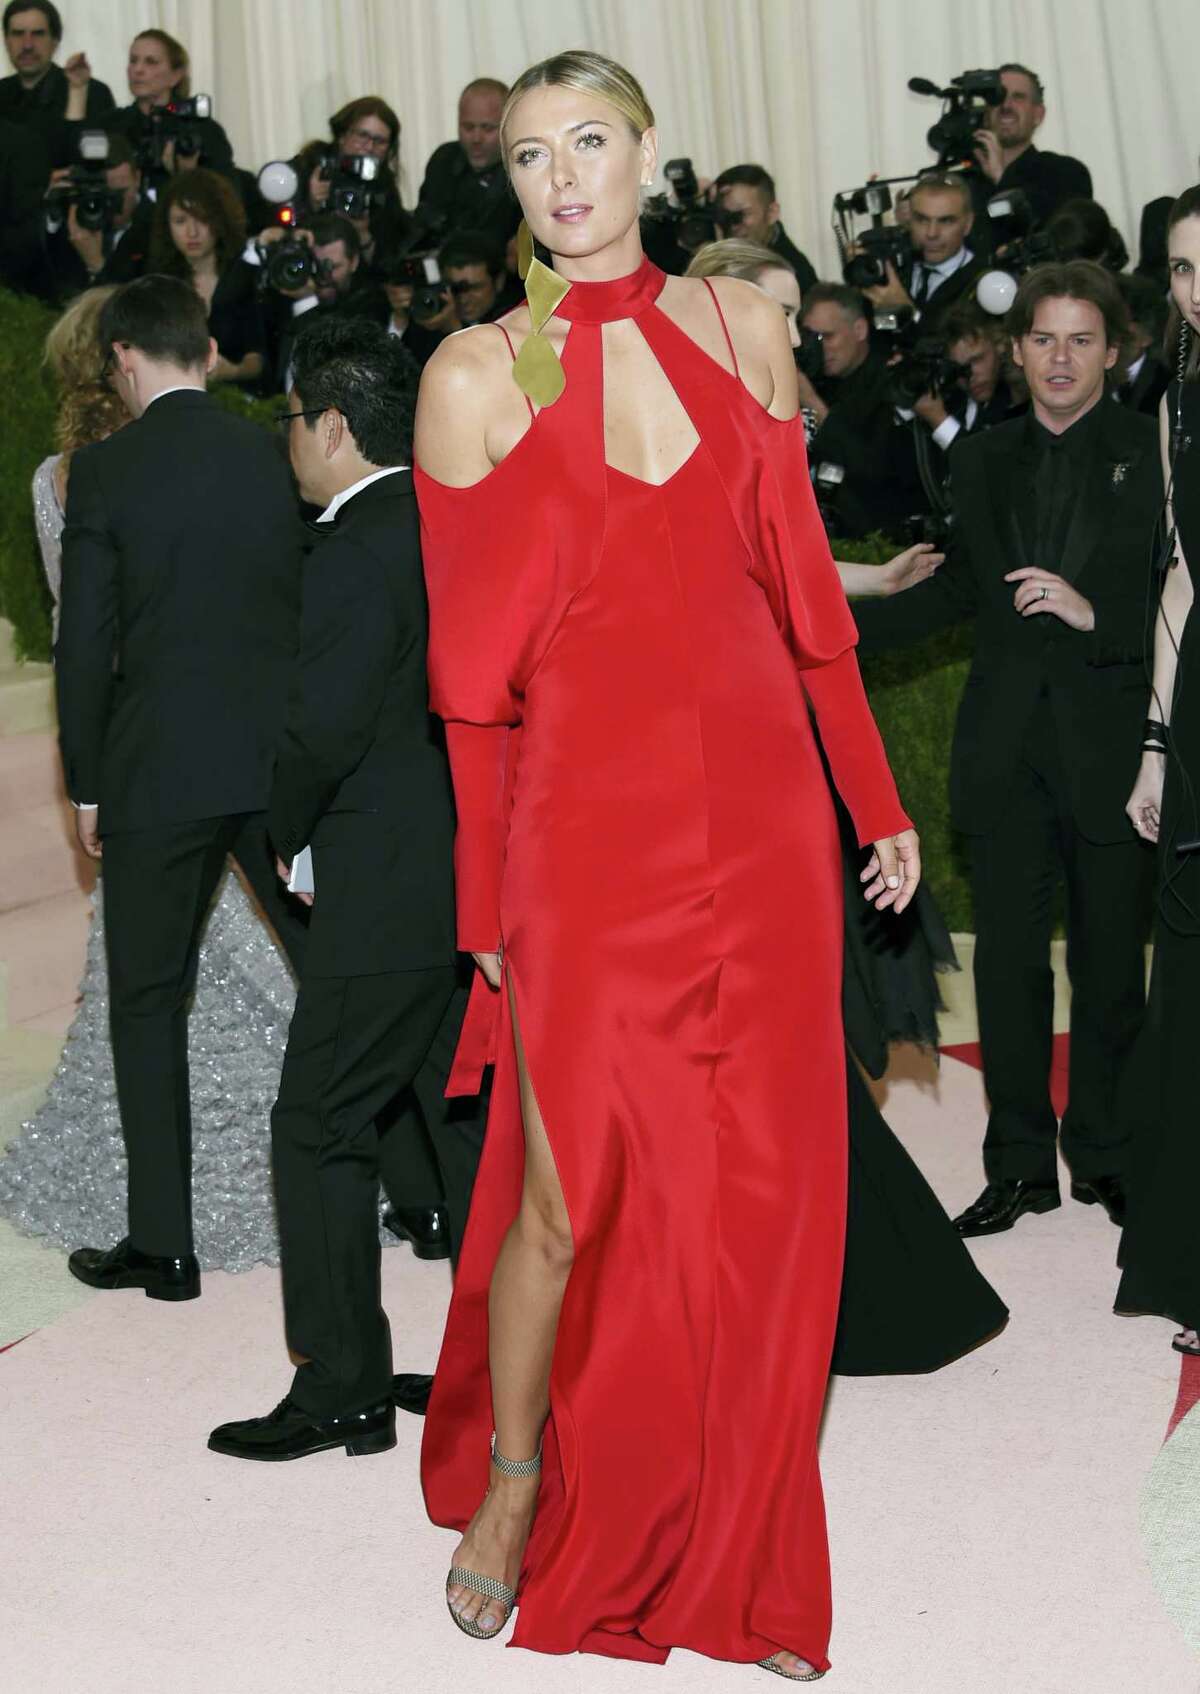 In this Monday, May 2, 2016 photo, Maria Sharapova arrives at The Metropolitan Museum of Art Costume Institute Benefit Gala, celebrating the opening of “Manus x Machina: Fashion in an Age of Technology” in New York. Sharapova has been suspended for two years by the International Tennis Federation for testing positive for meldonium at the Australian Open.